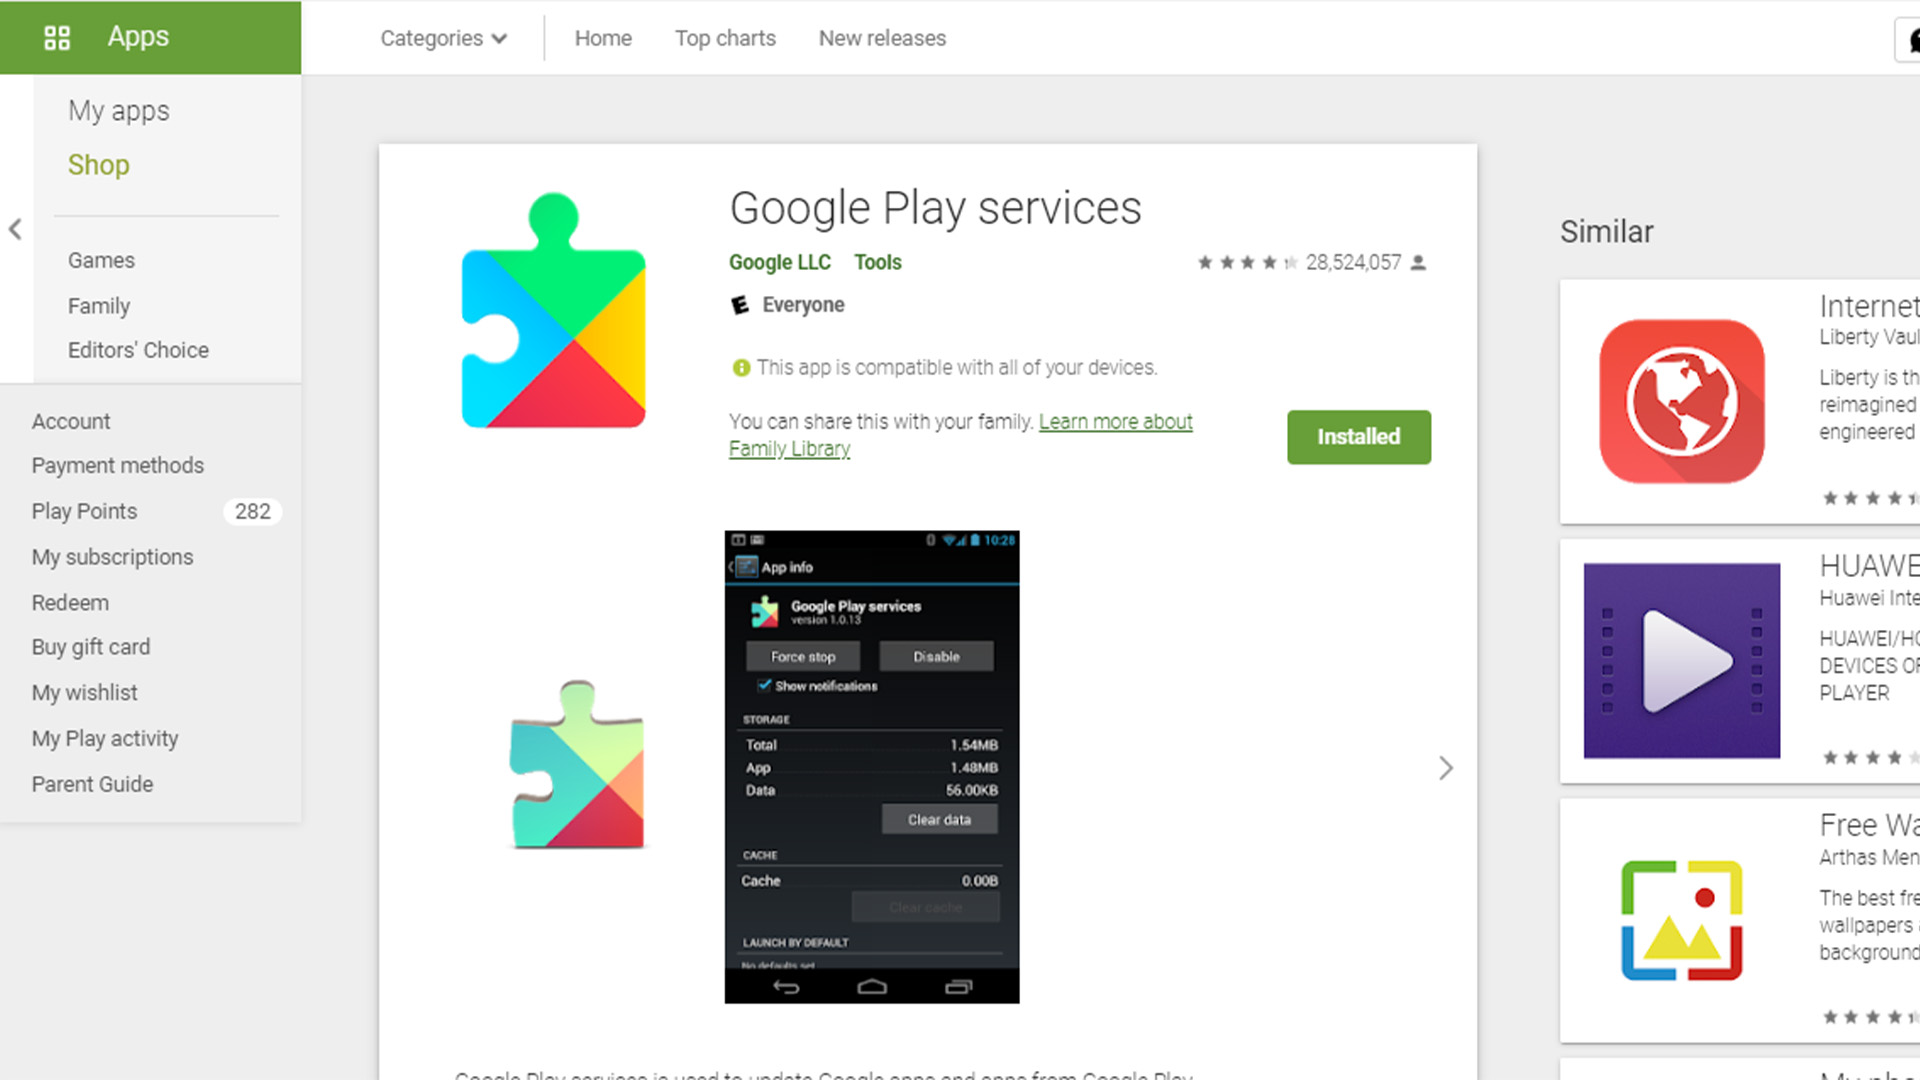 Google Play Services Play Store page